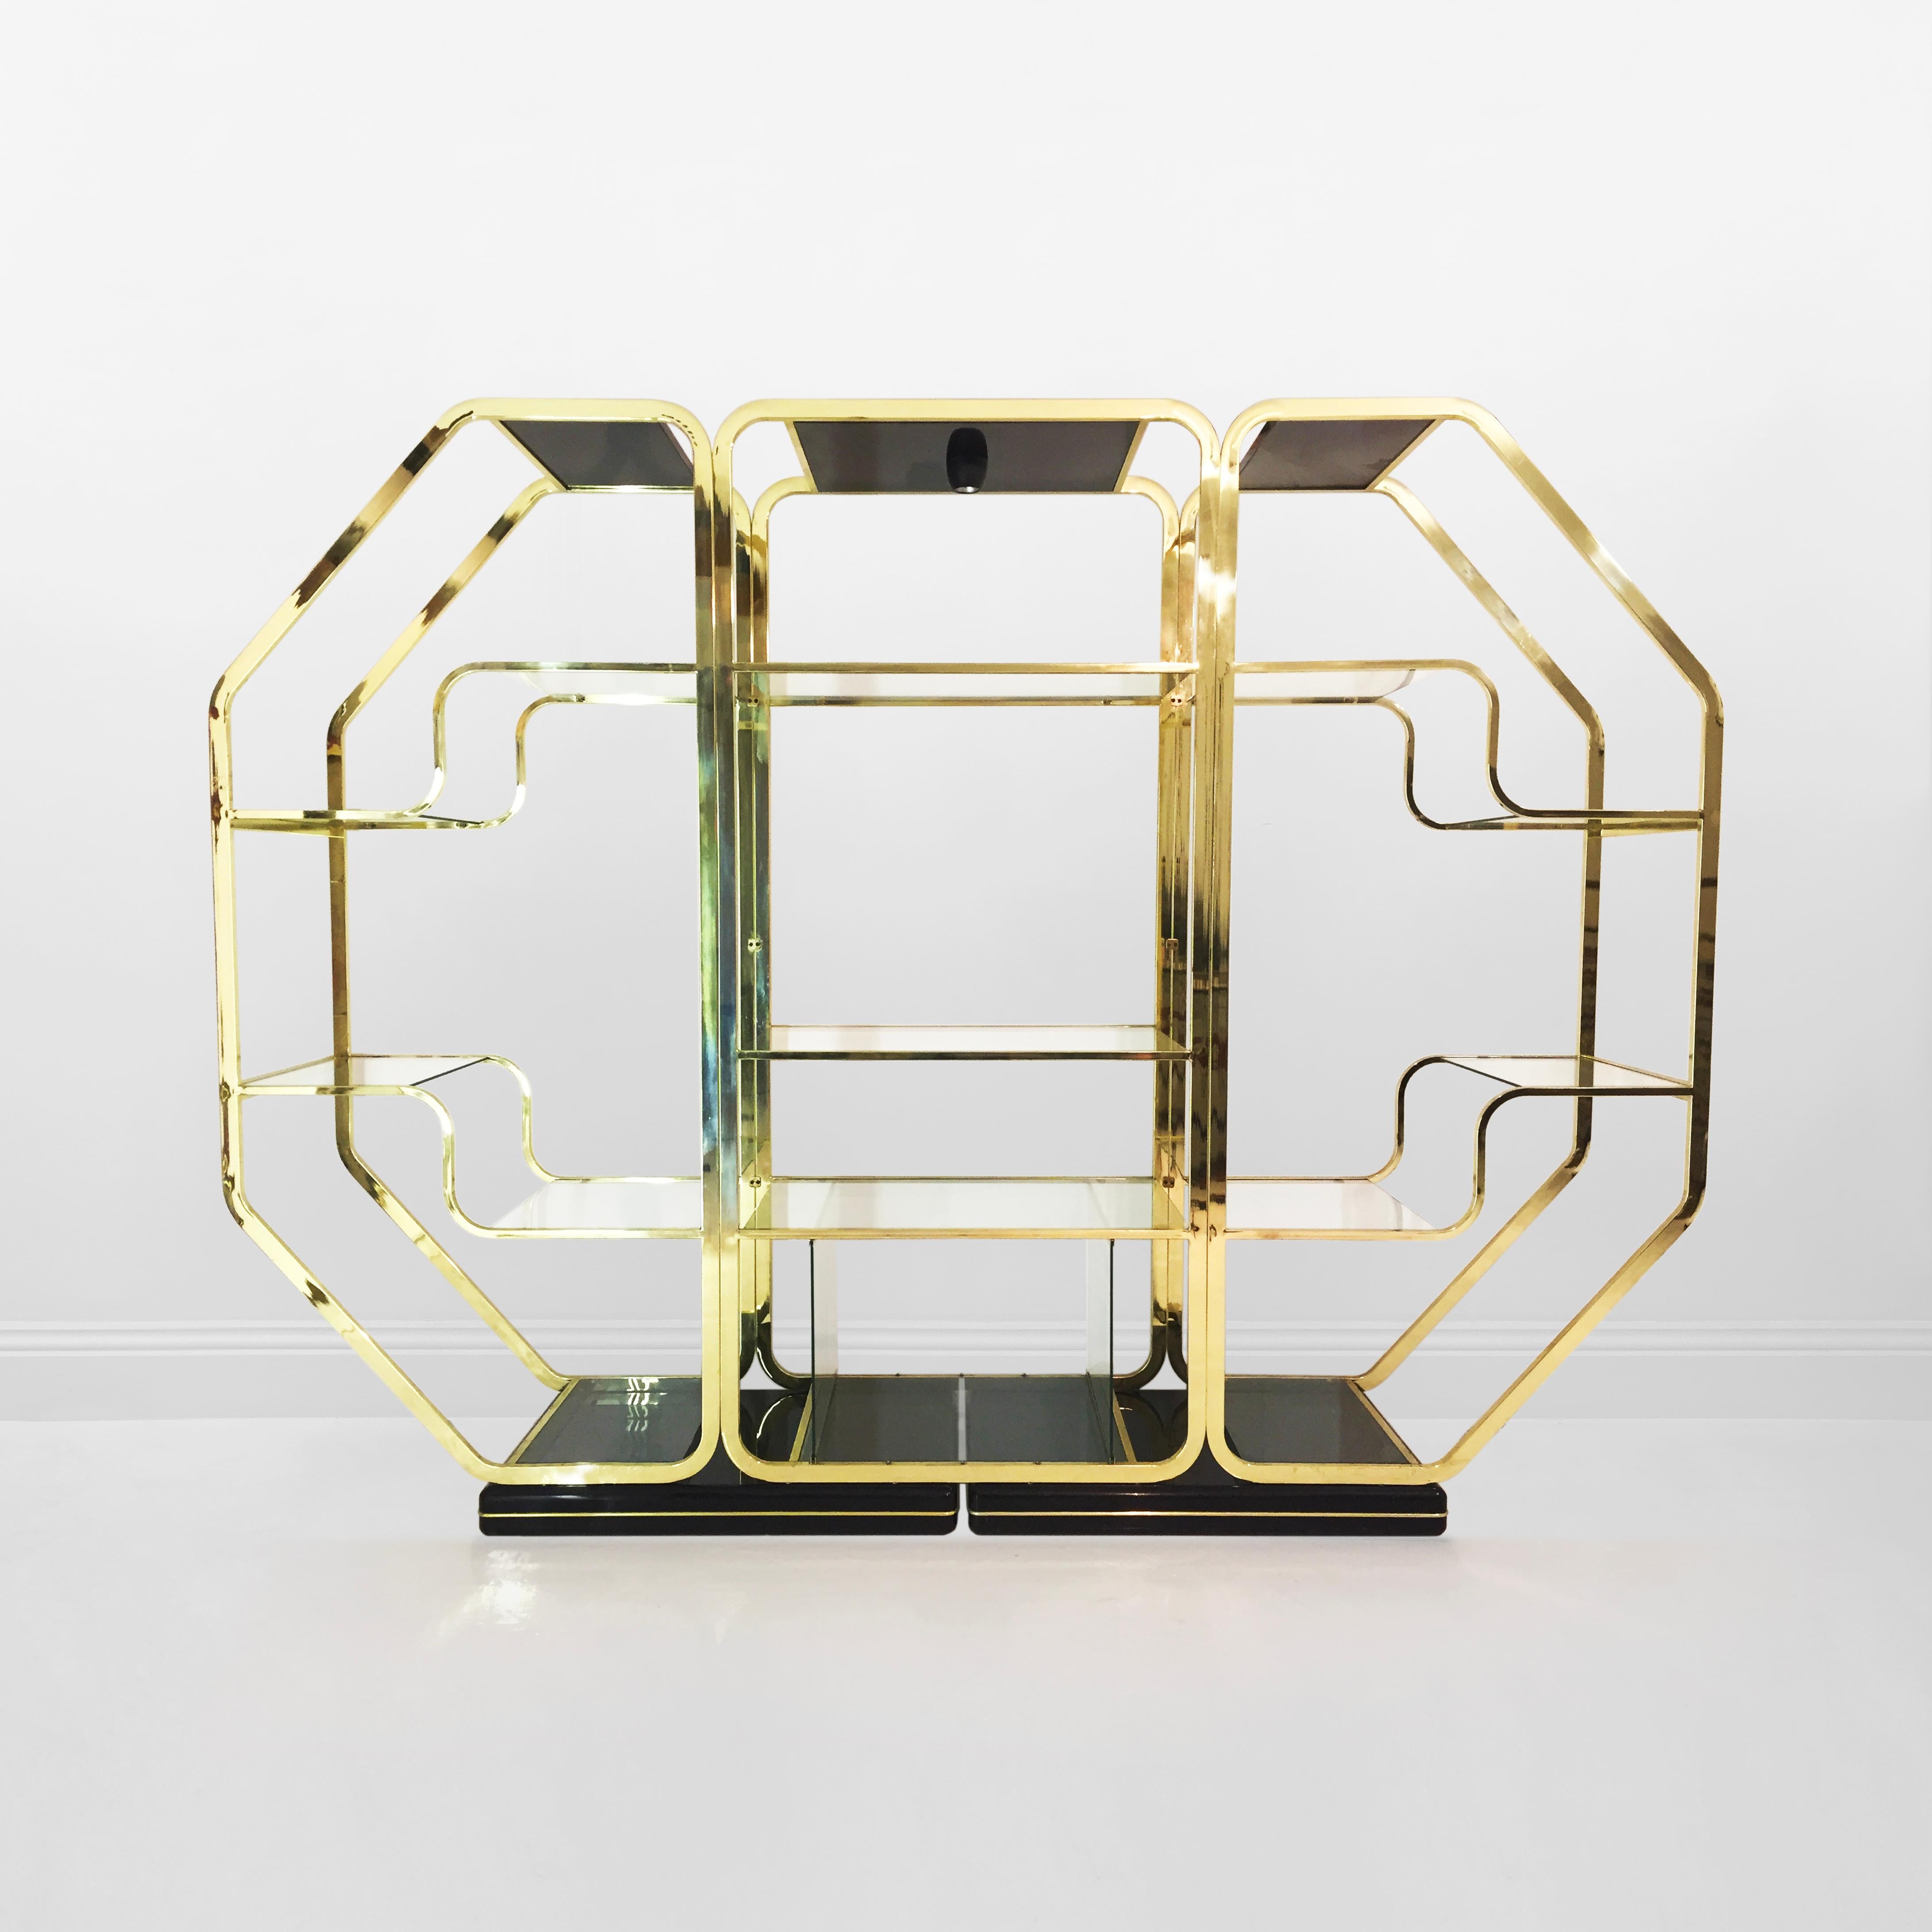 A 1970s Italian display unit in the manner of Romeo Rega or Renato Zevi, in a unique and large octagonal shape. The base is composed of two pieces of rectangular black lacquered wood, with curved edges and a brass trim. The piece is finished with a